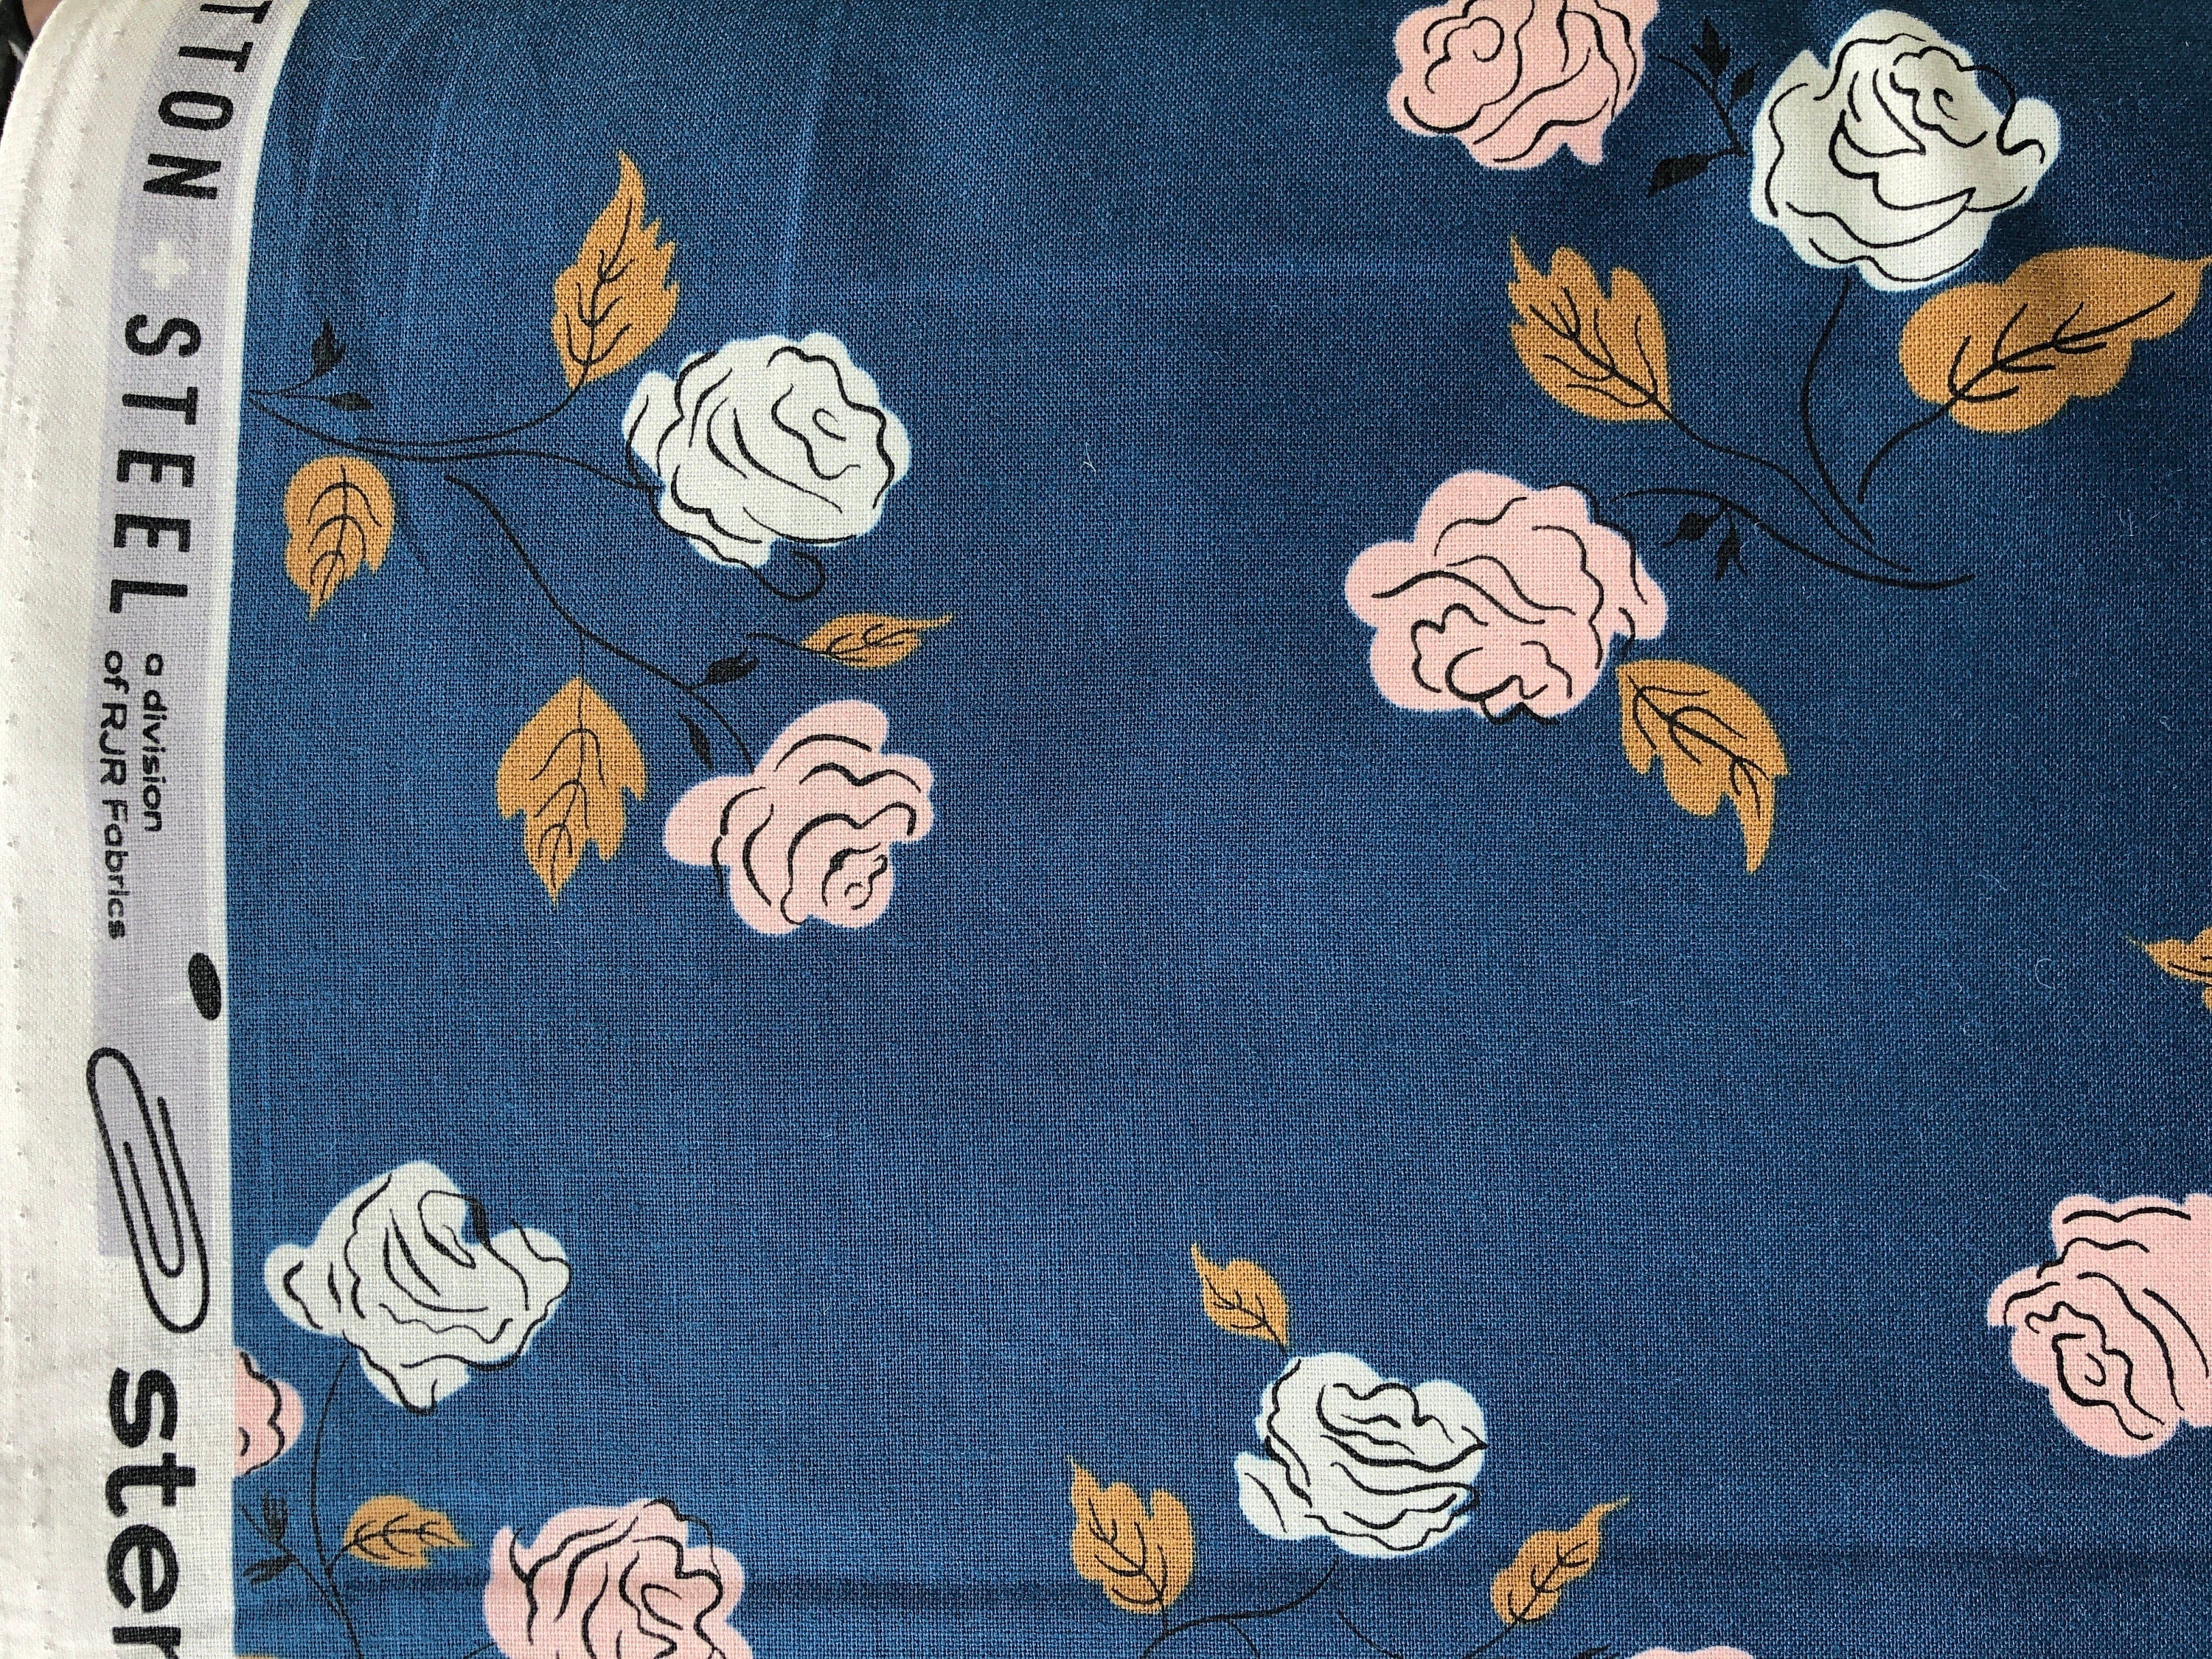 Steno Pool - Roses Midnight - Kimberly Kight - Cotton + Steel Fabric - Blue - Pink - Brown - Quilting Cotton - K3065-001